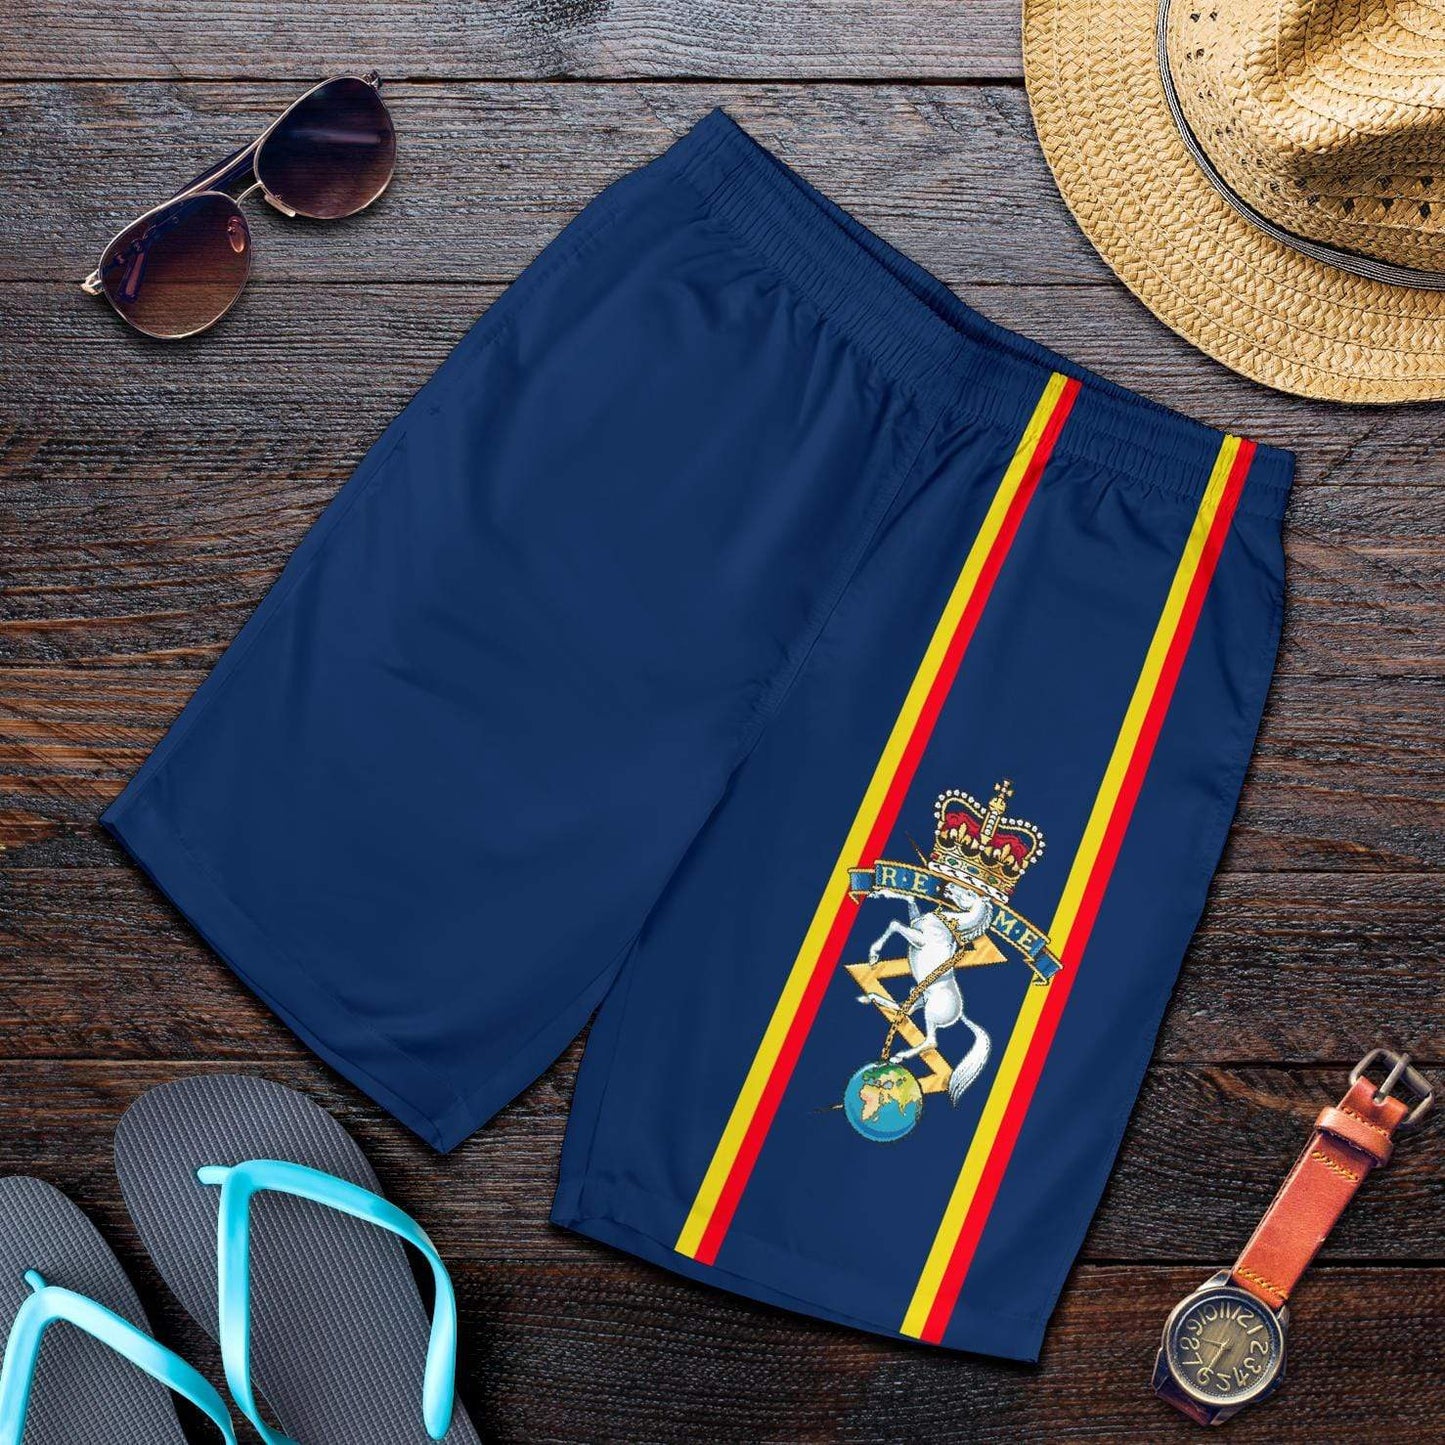 shorts Royal Electrical and Mechanical Engineers Men's Shorts